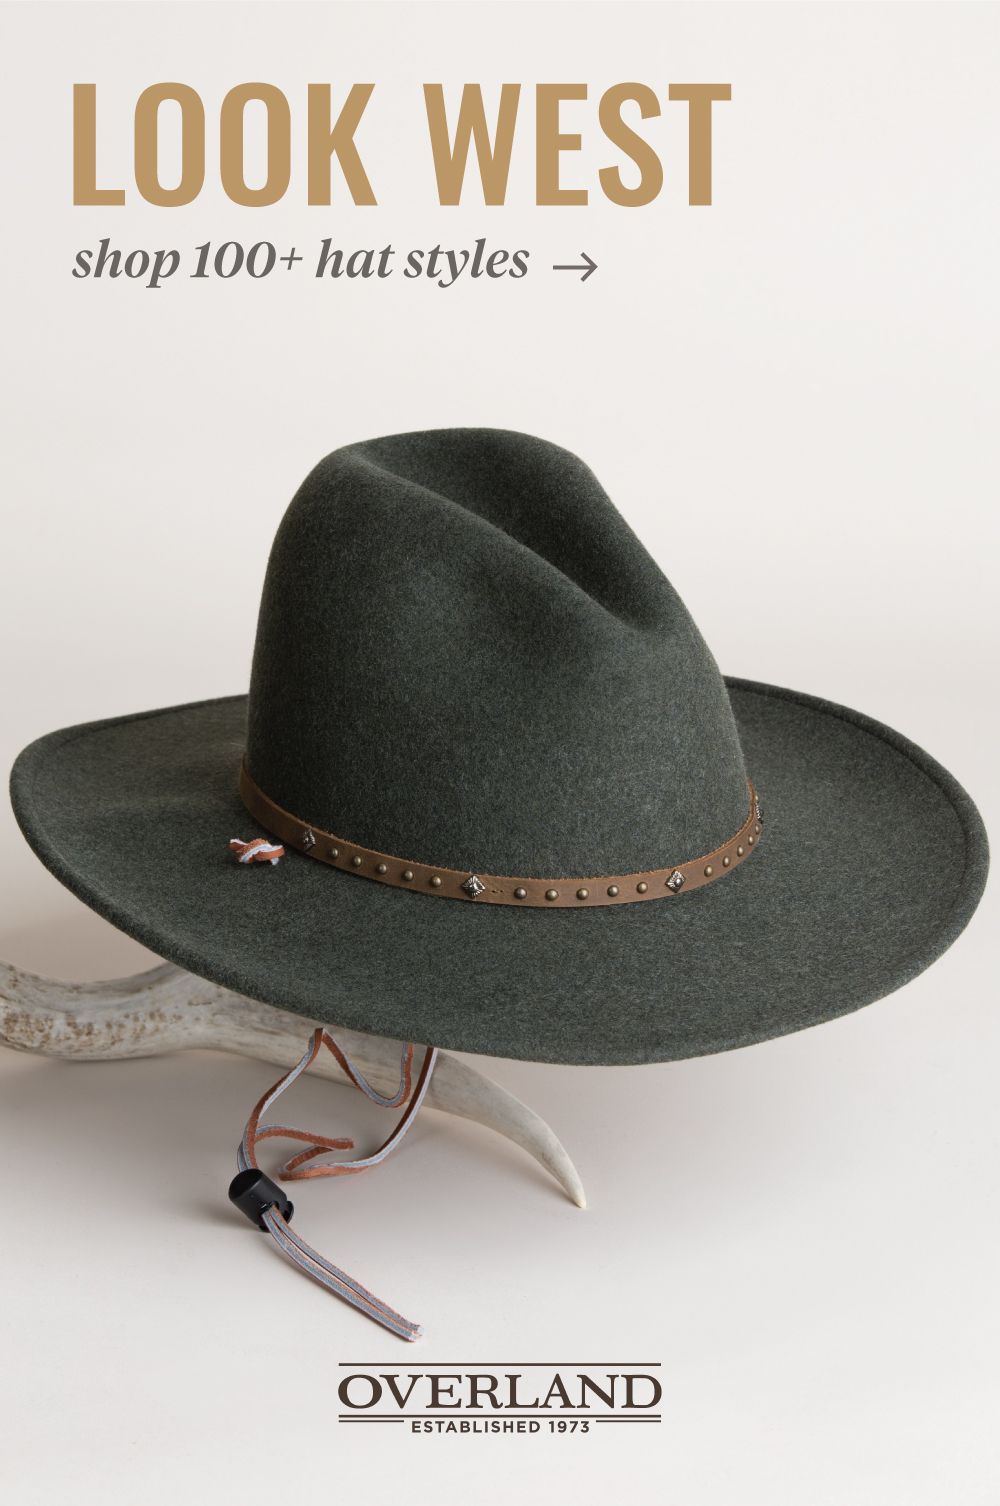 Classy Hats For Men Making Bold Statement